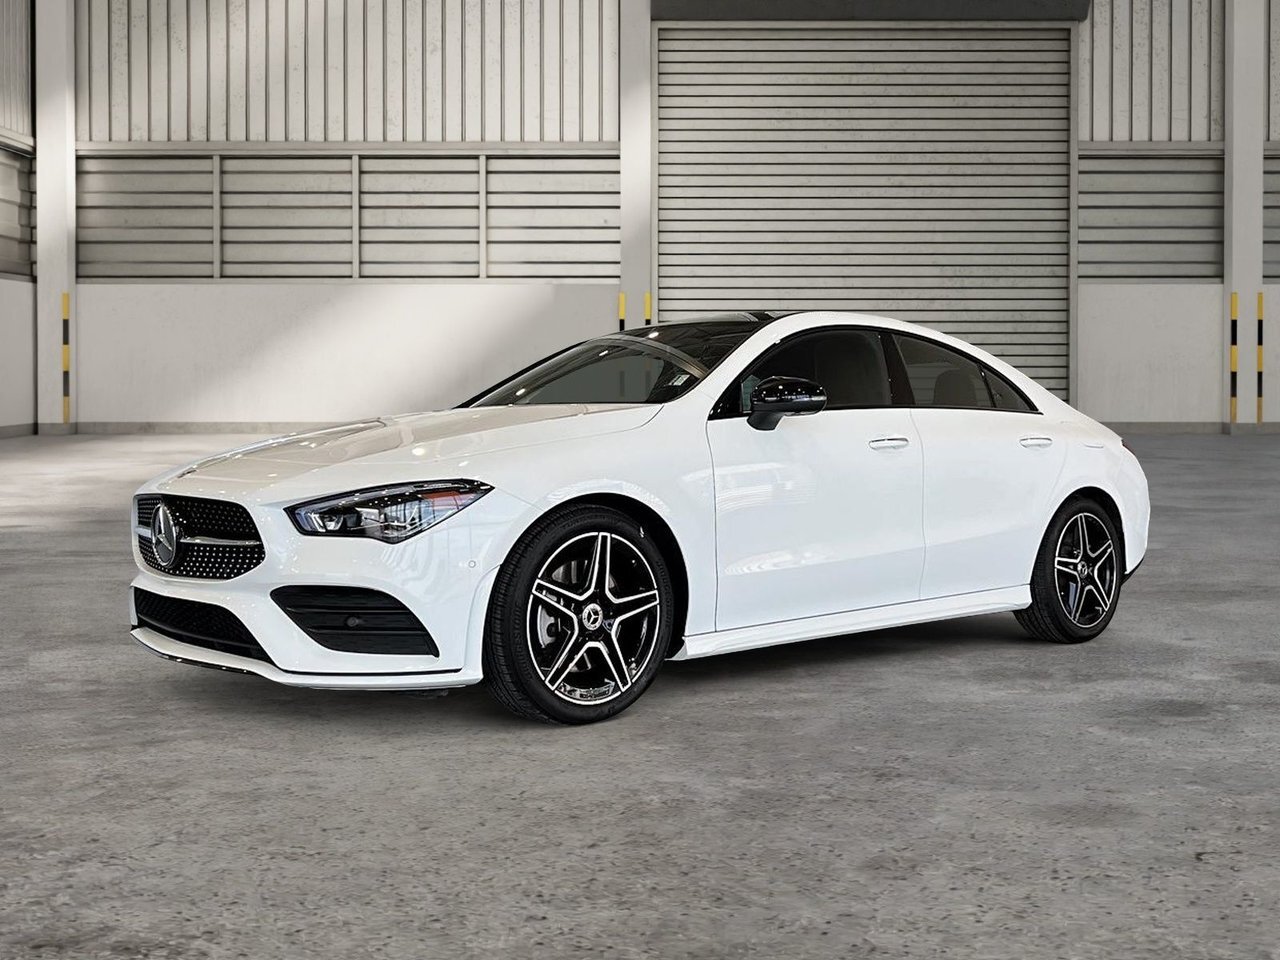 2023 Mercedes-Benz CLA250 4MATIC Coupe Warranty until 2029!